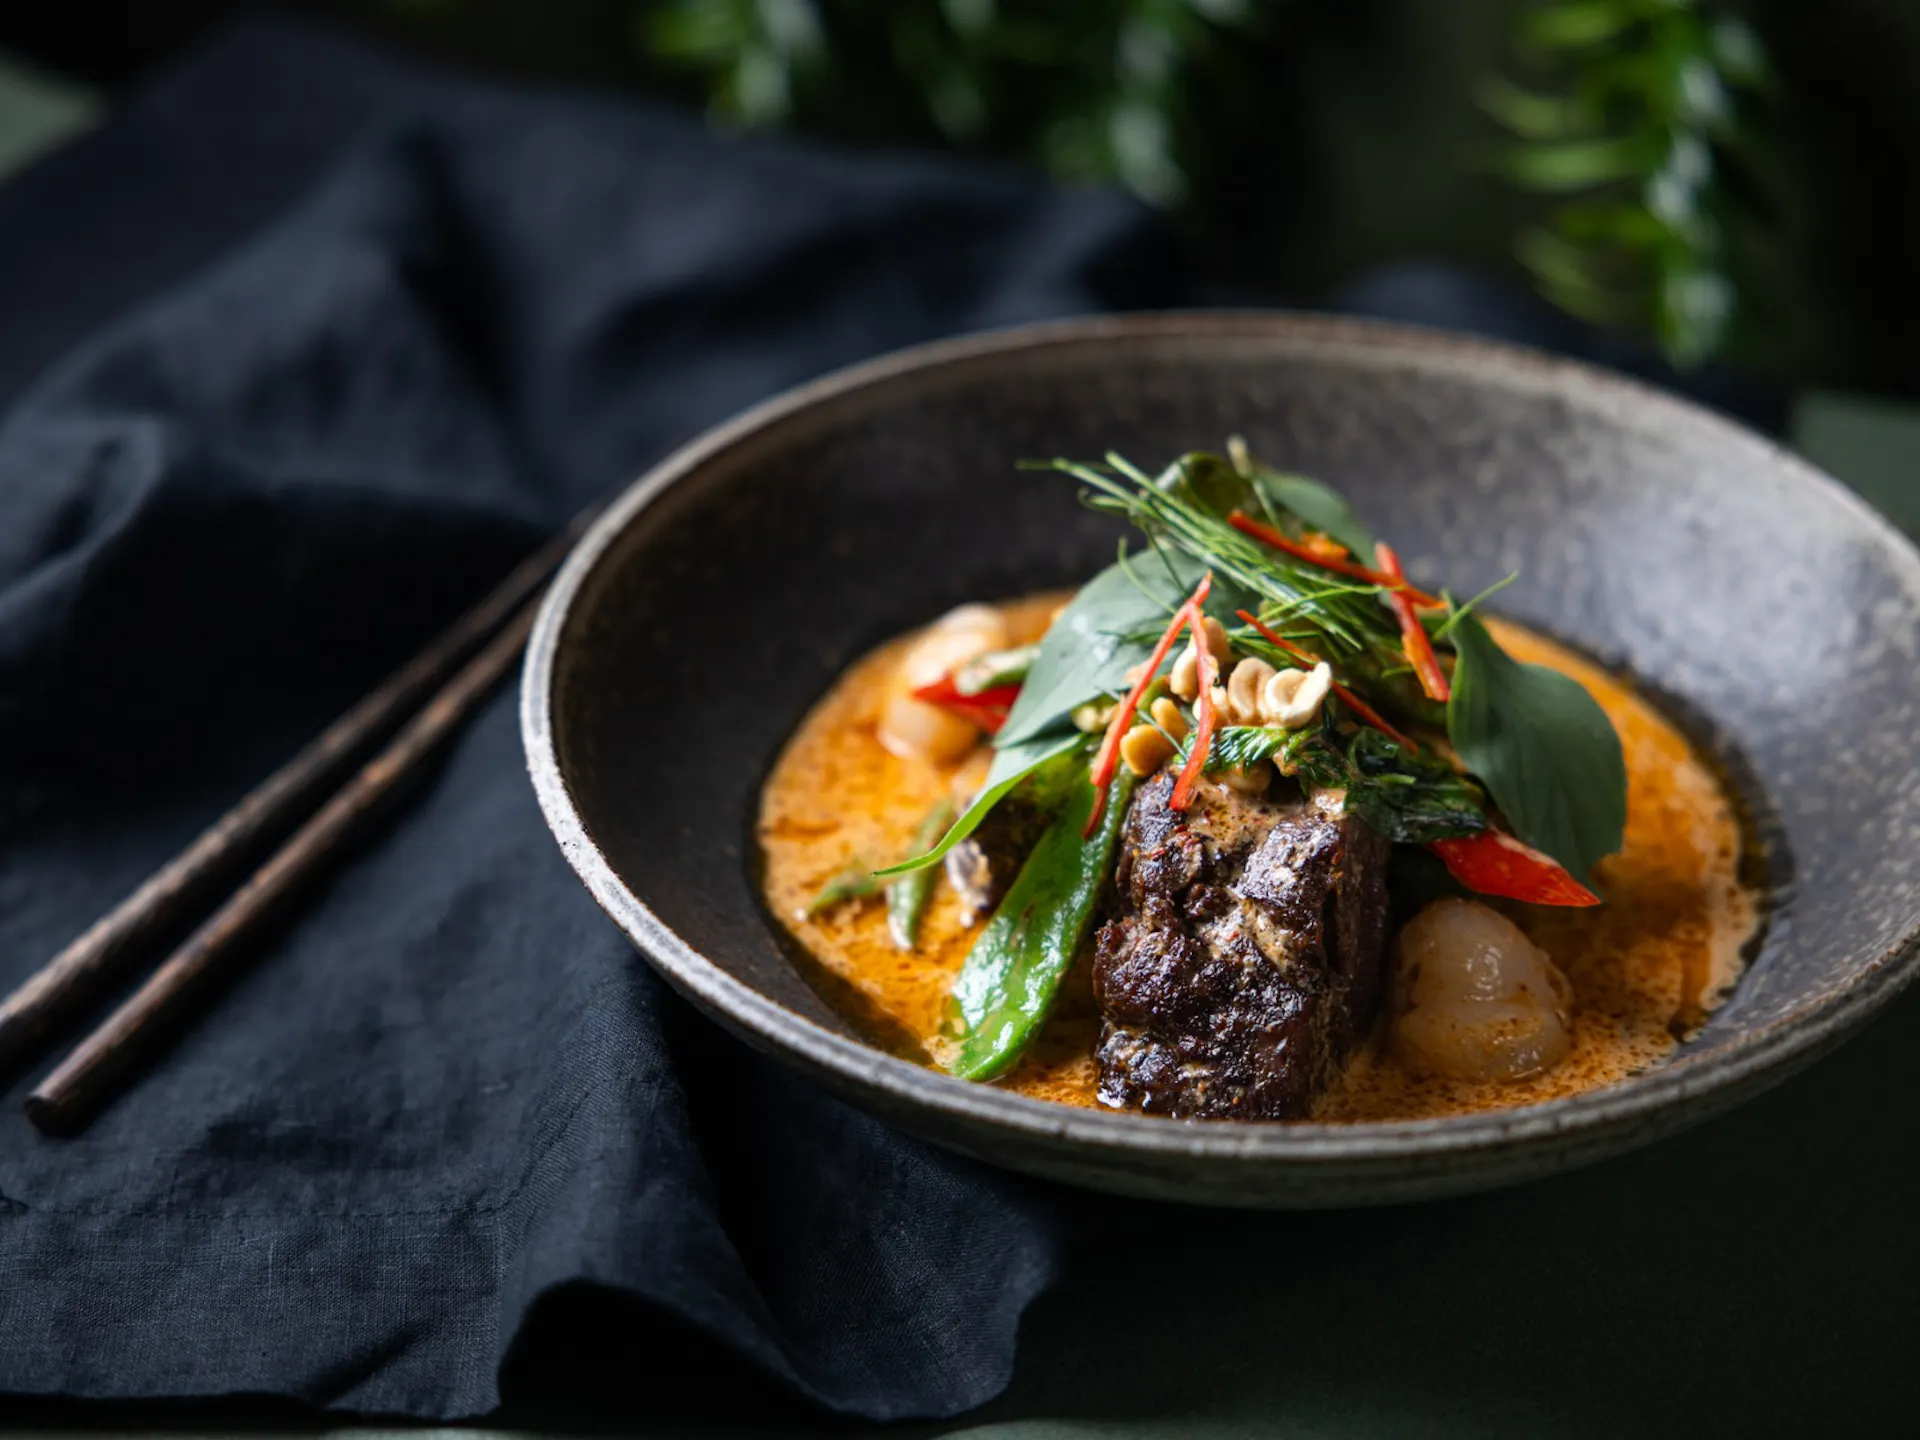 Red curry of slow cooked beef, lychee, wild ginger, roasted peanuts